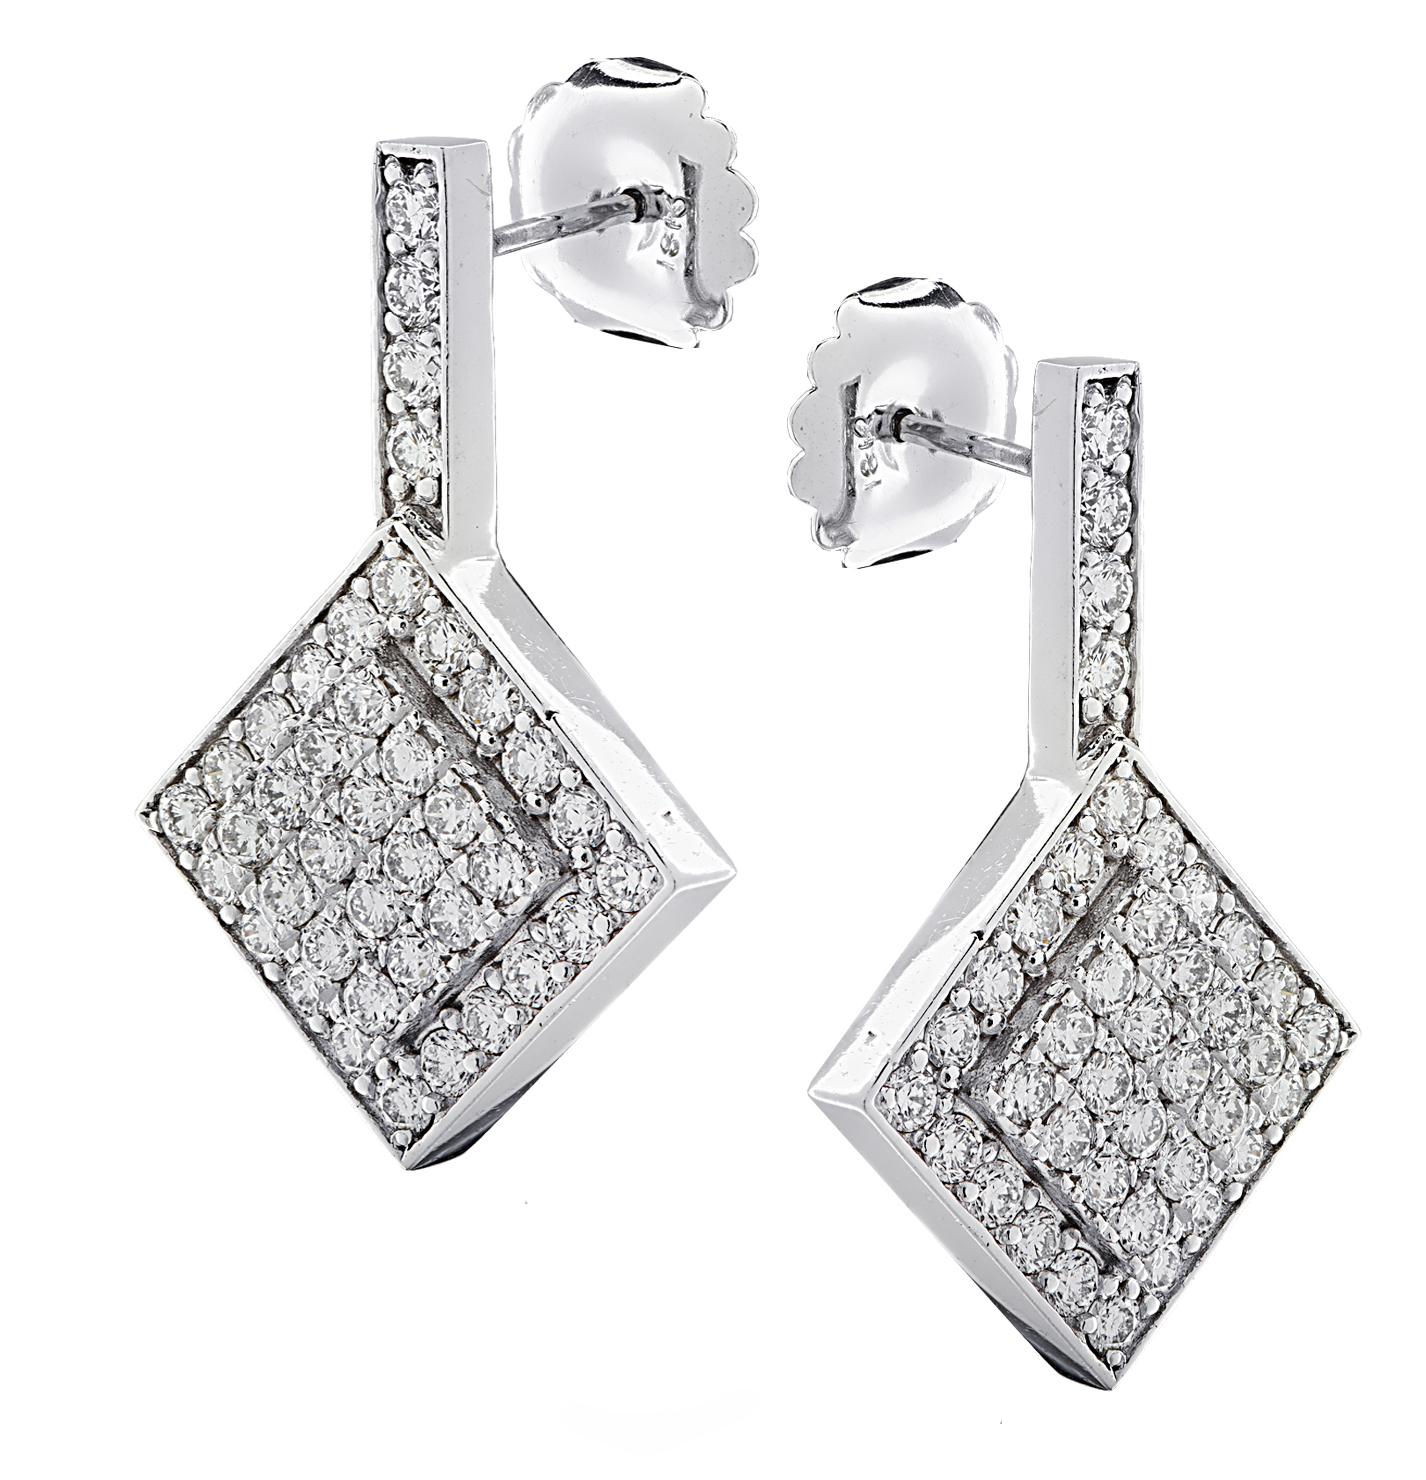 Stunning dangle earrings crafted in 18 karat white gold featuring 88 round brilliant cut diamonds weighing approximately 4 carats total, G color, VS clarity. These striking earrings measure 1.3 inches in length and .84 of an inch at their widest